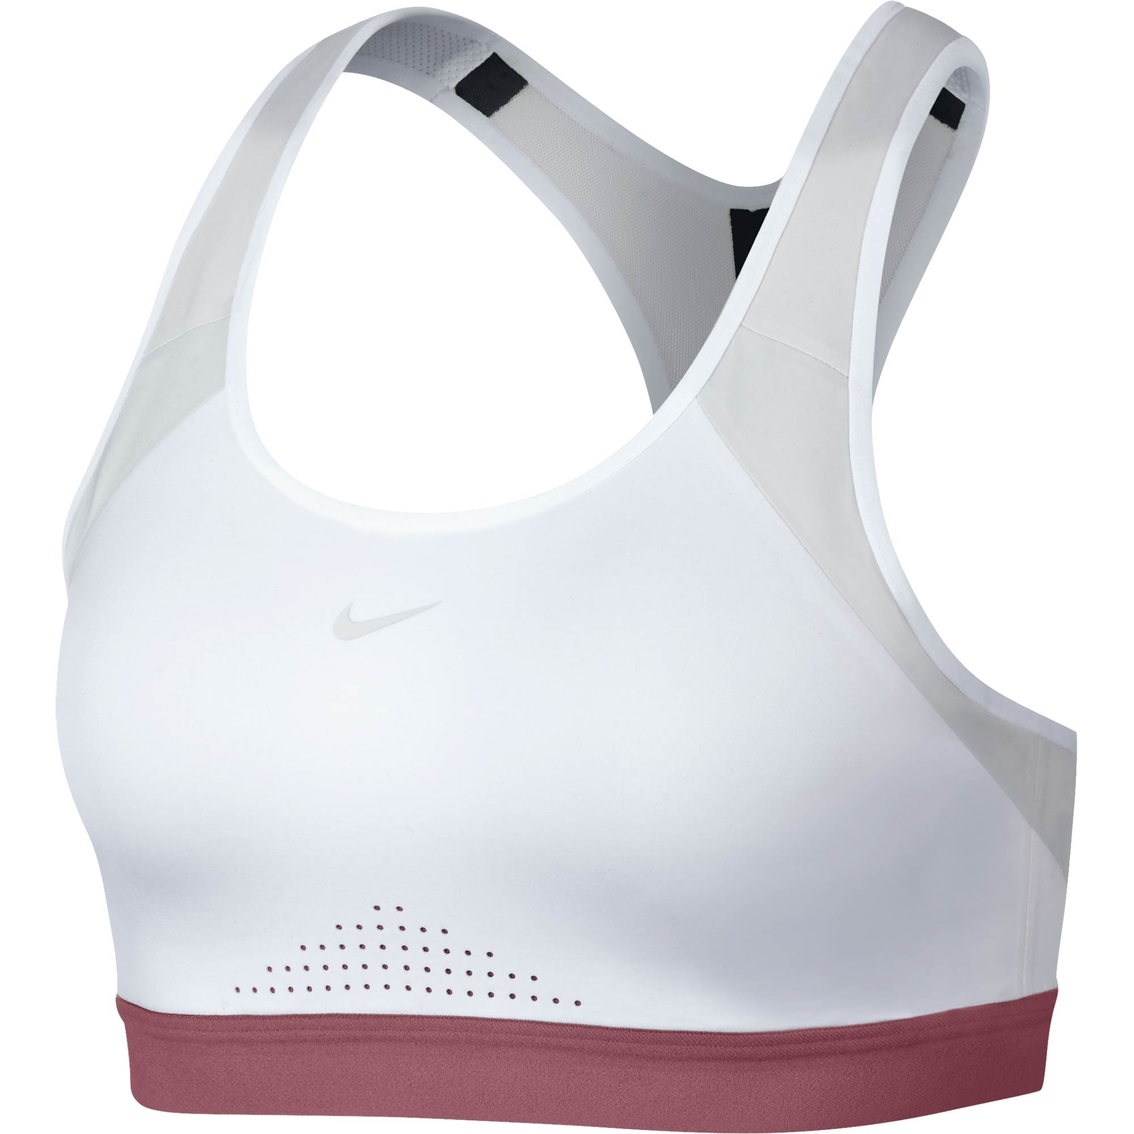 Nike Motion Adapt High Support Sports Bra, Bras, Clothing & Accessories